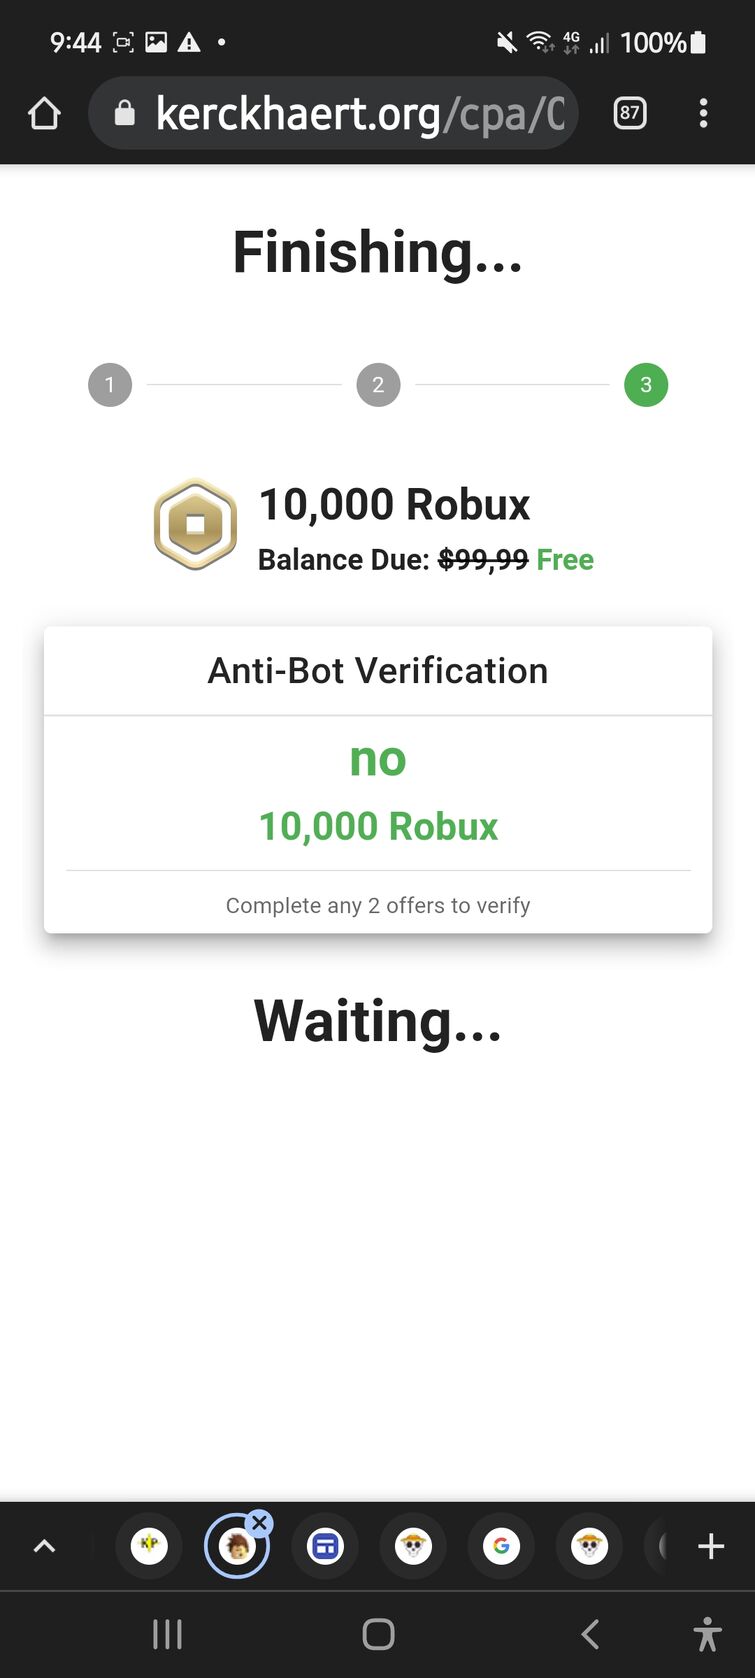 Hey, do you want to know what free robux websites are like?(Im doing this  just for fun) Dont ban me